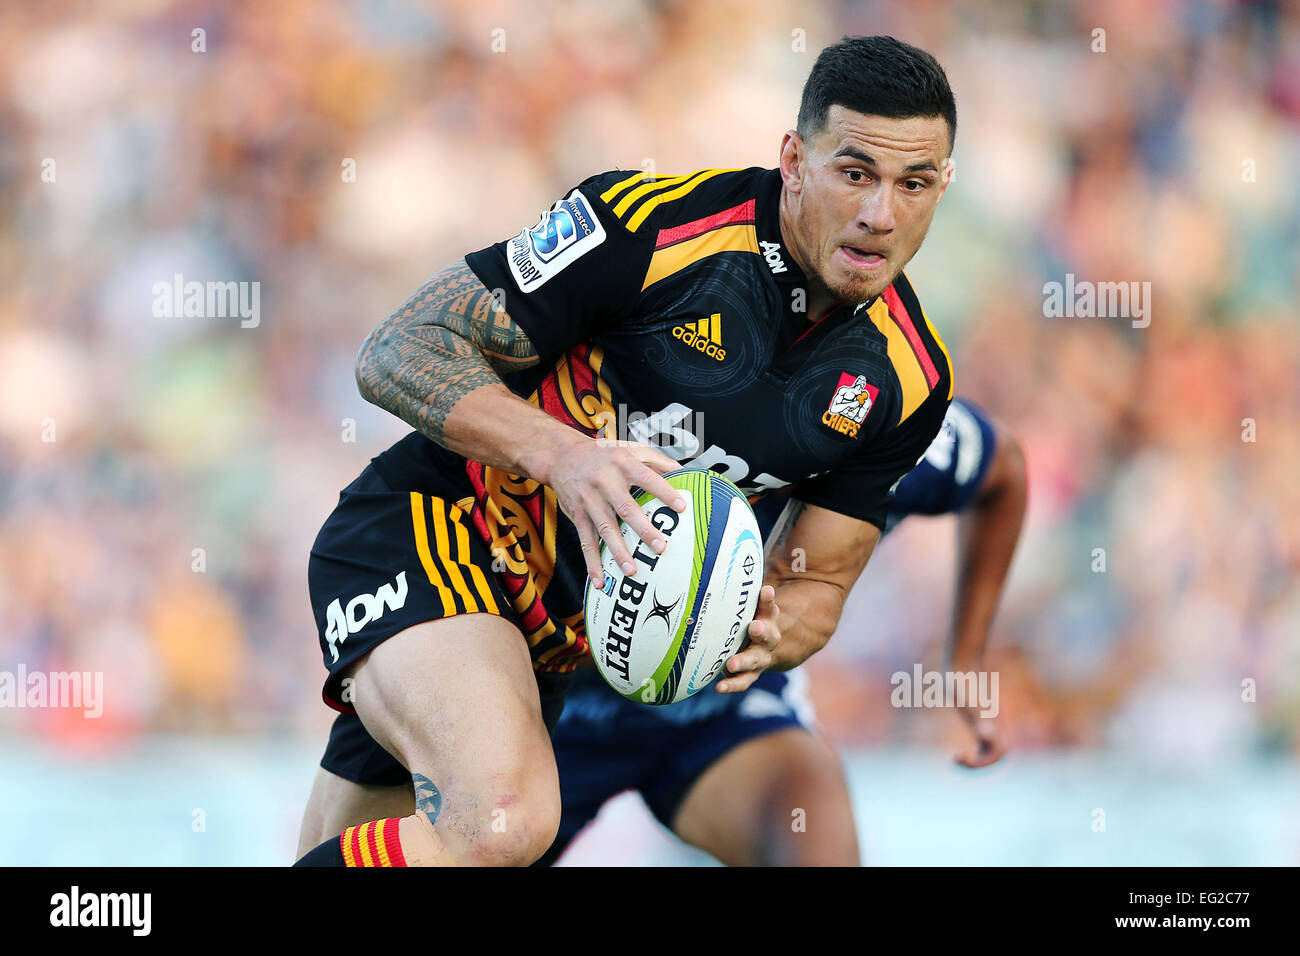 Auckland, New Zealand. 14th Feb, 2015. Sonny Bill Williams of the Chiefs makes a break. Super Rugby match, Blues (Auckland) versus Chiefs (Hamilton) at QBE Stadium, Auckland, New Zealand. Saturday 14 February 2015. The Chiefs ran out winners by 18-23 in a close derby. © Action Plus Sports/Alamy Live News Stock Photo